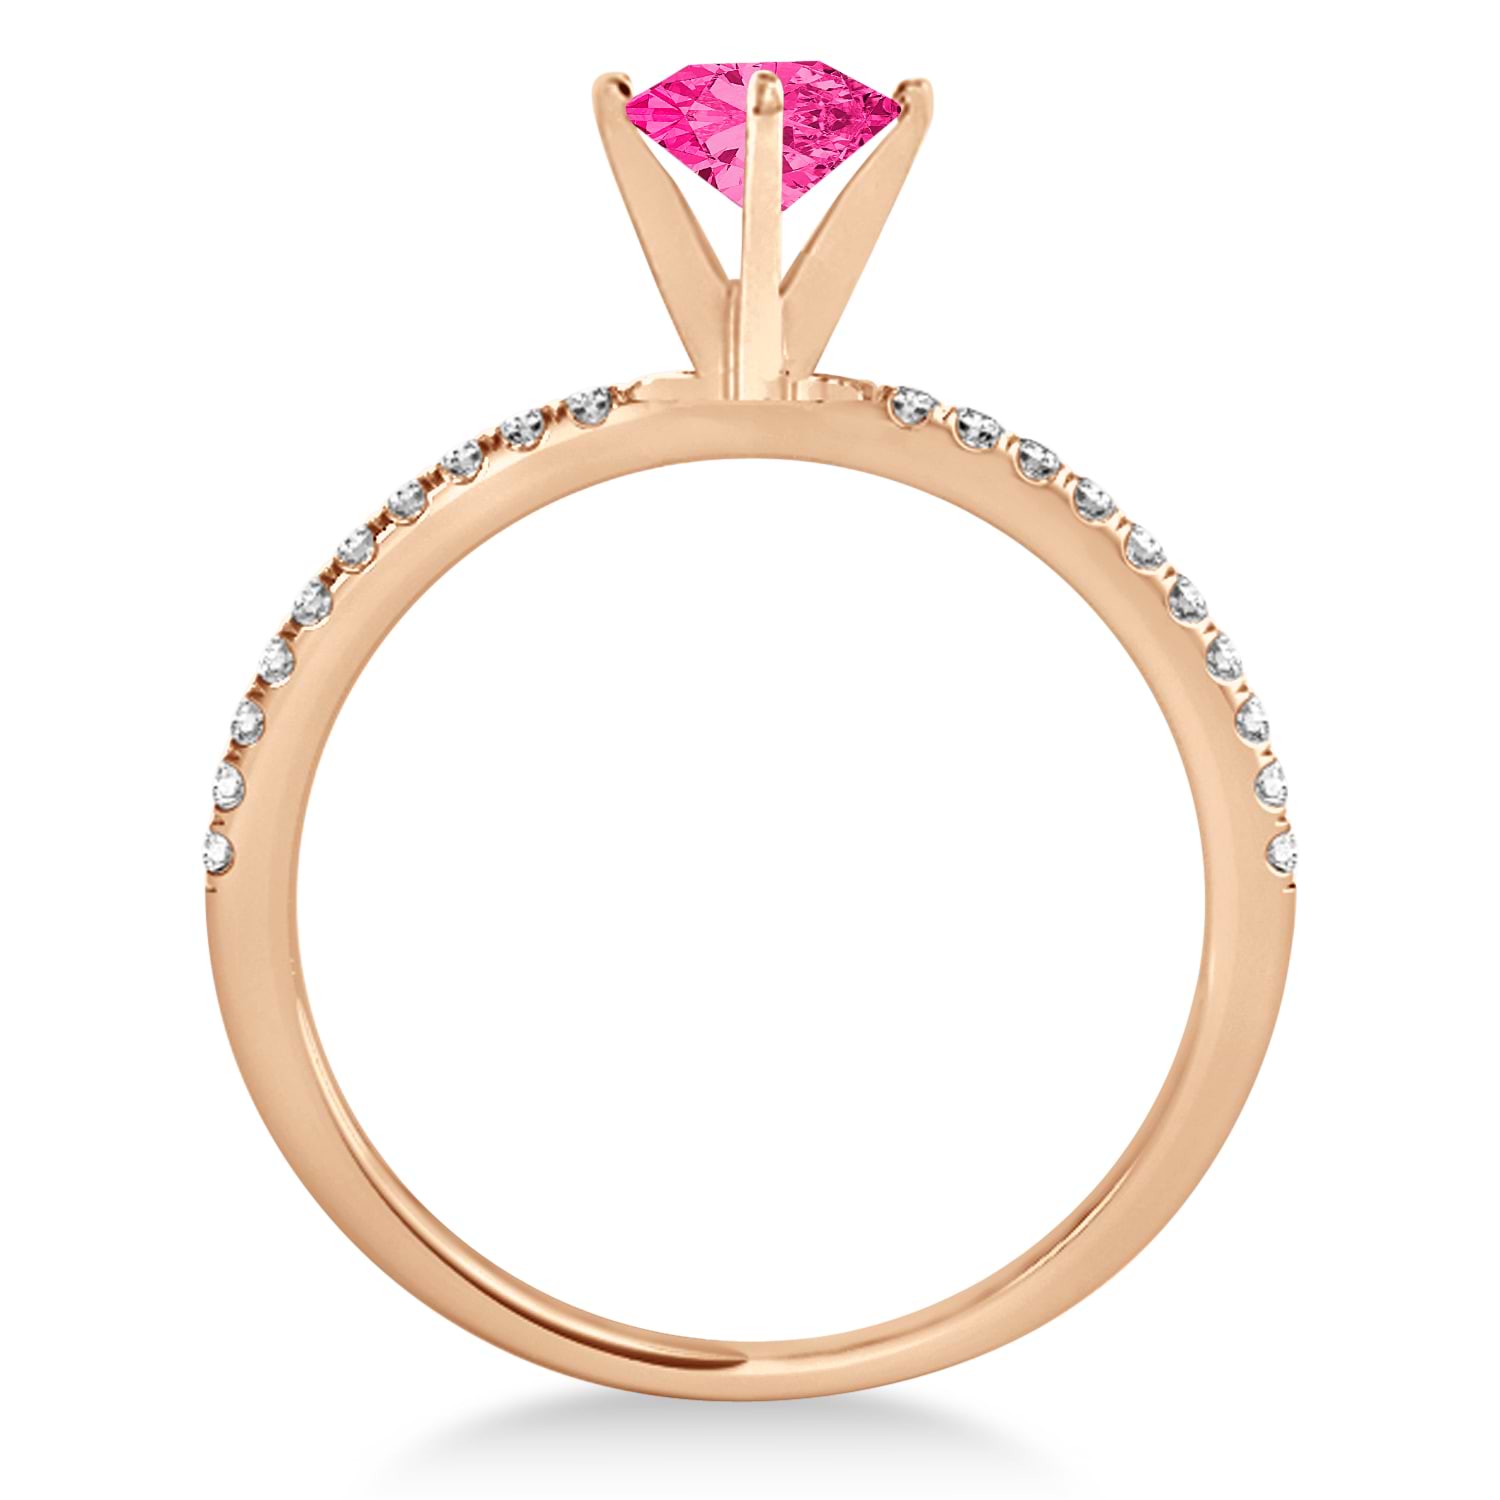 Pink Tourmaline & Diamond Accented Oval Shape Engagement Ring 18k Rose Gold (1.50ct)